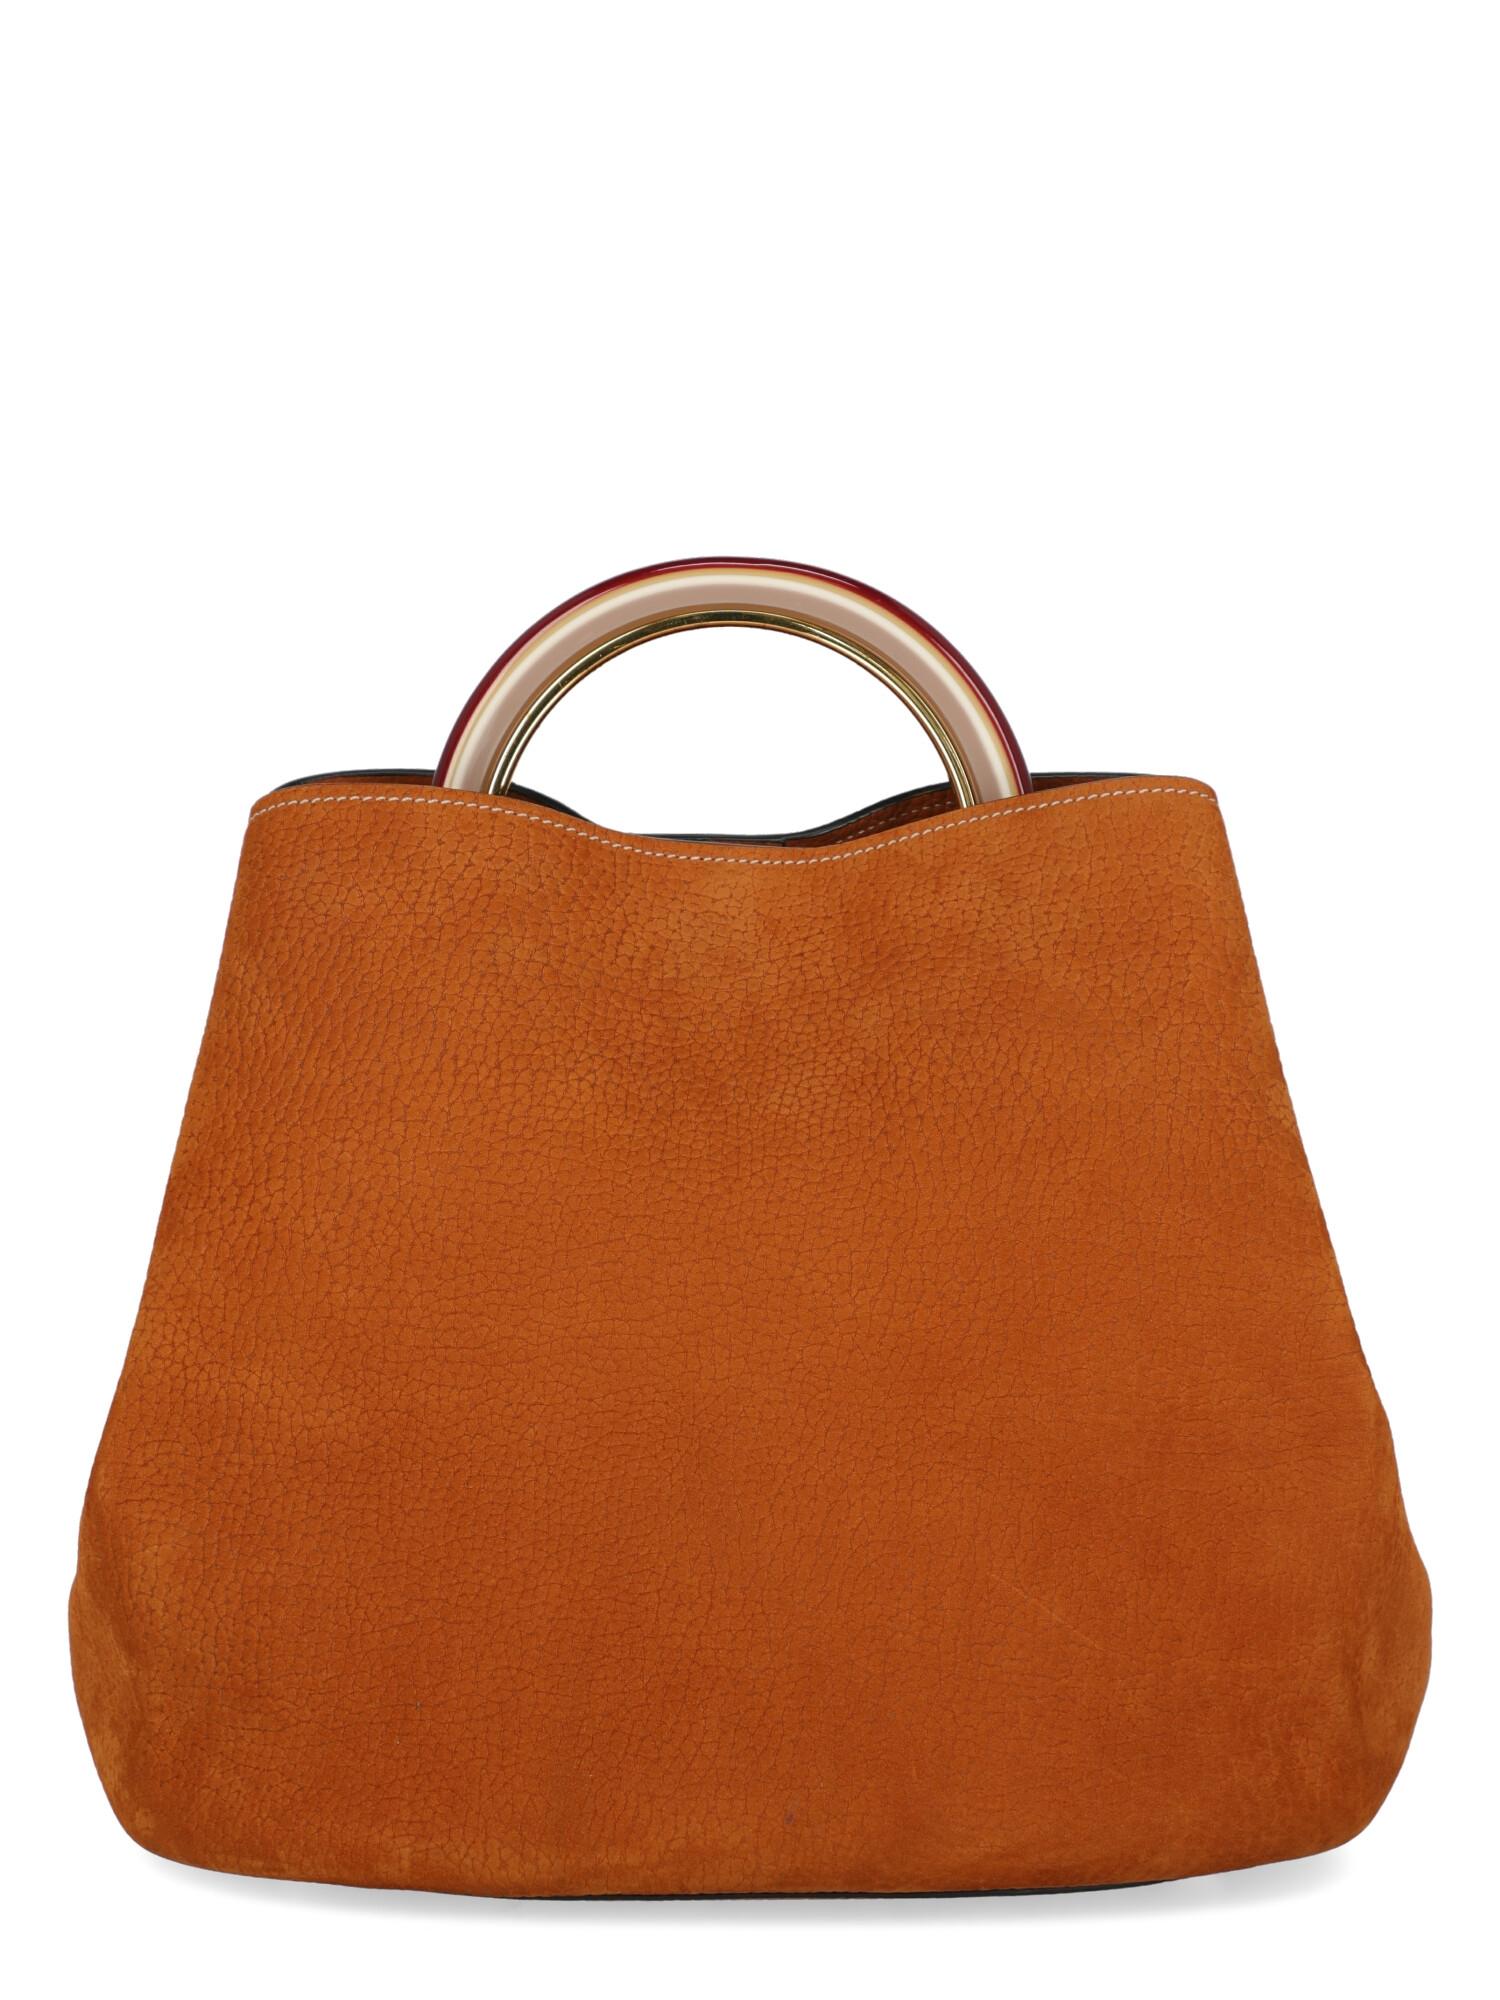 Marni Women Handbags Orange Leather  In Good Condition For Sale In Milan, IT